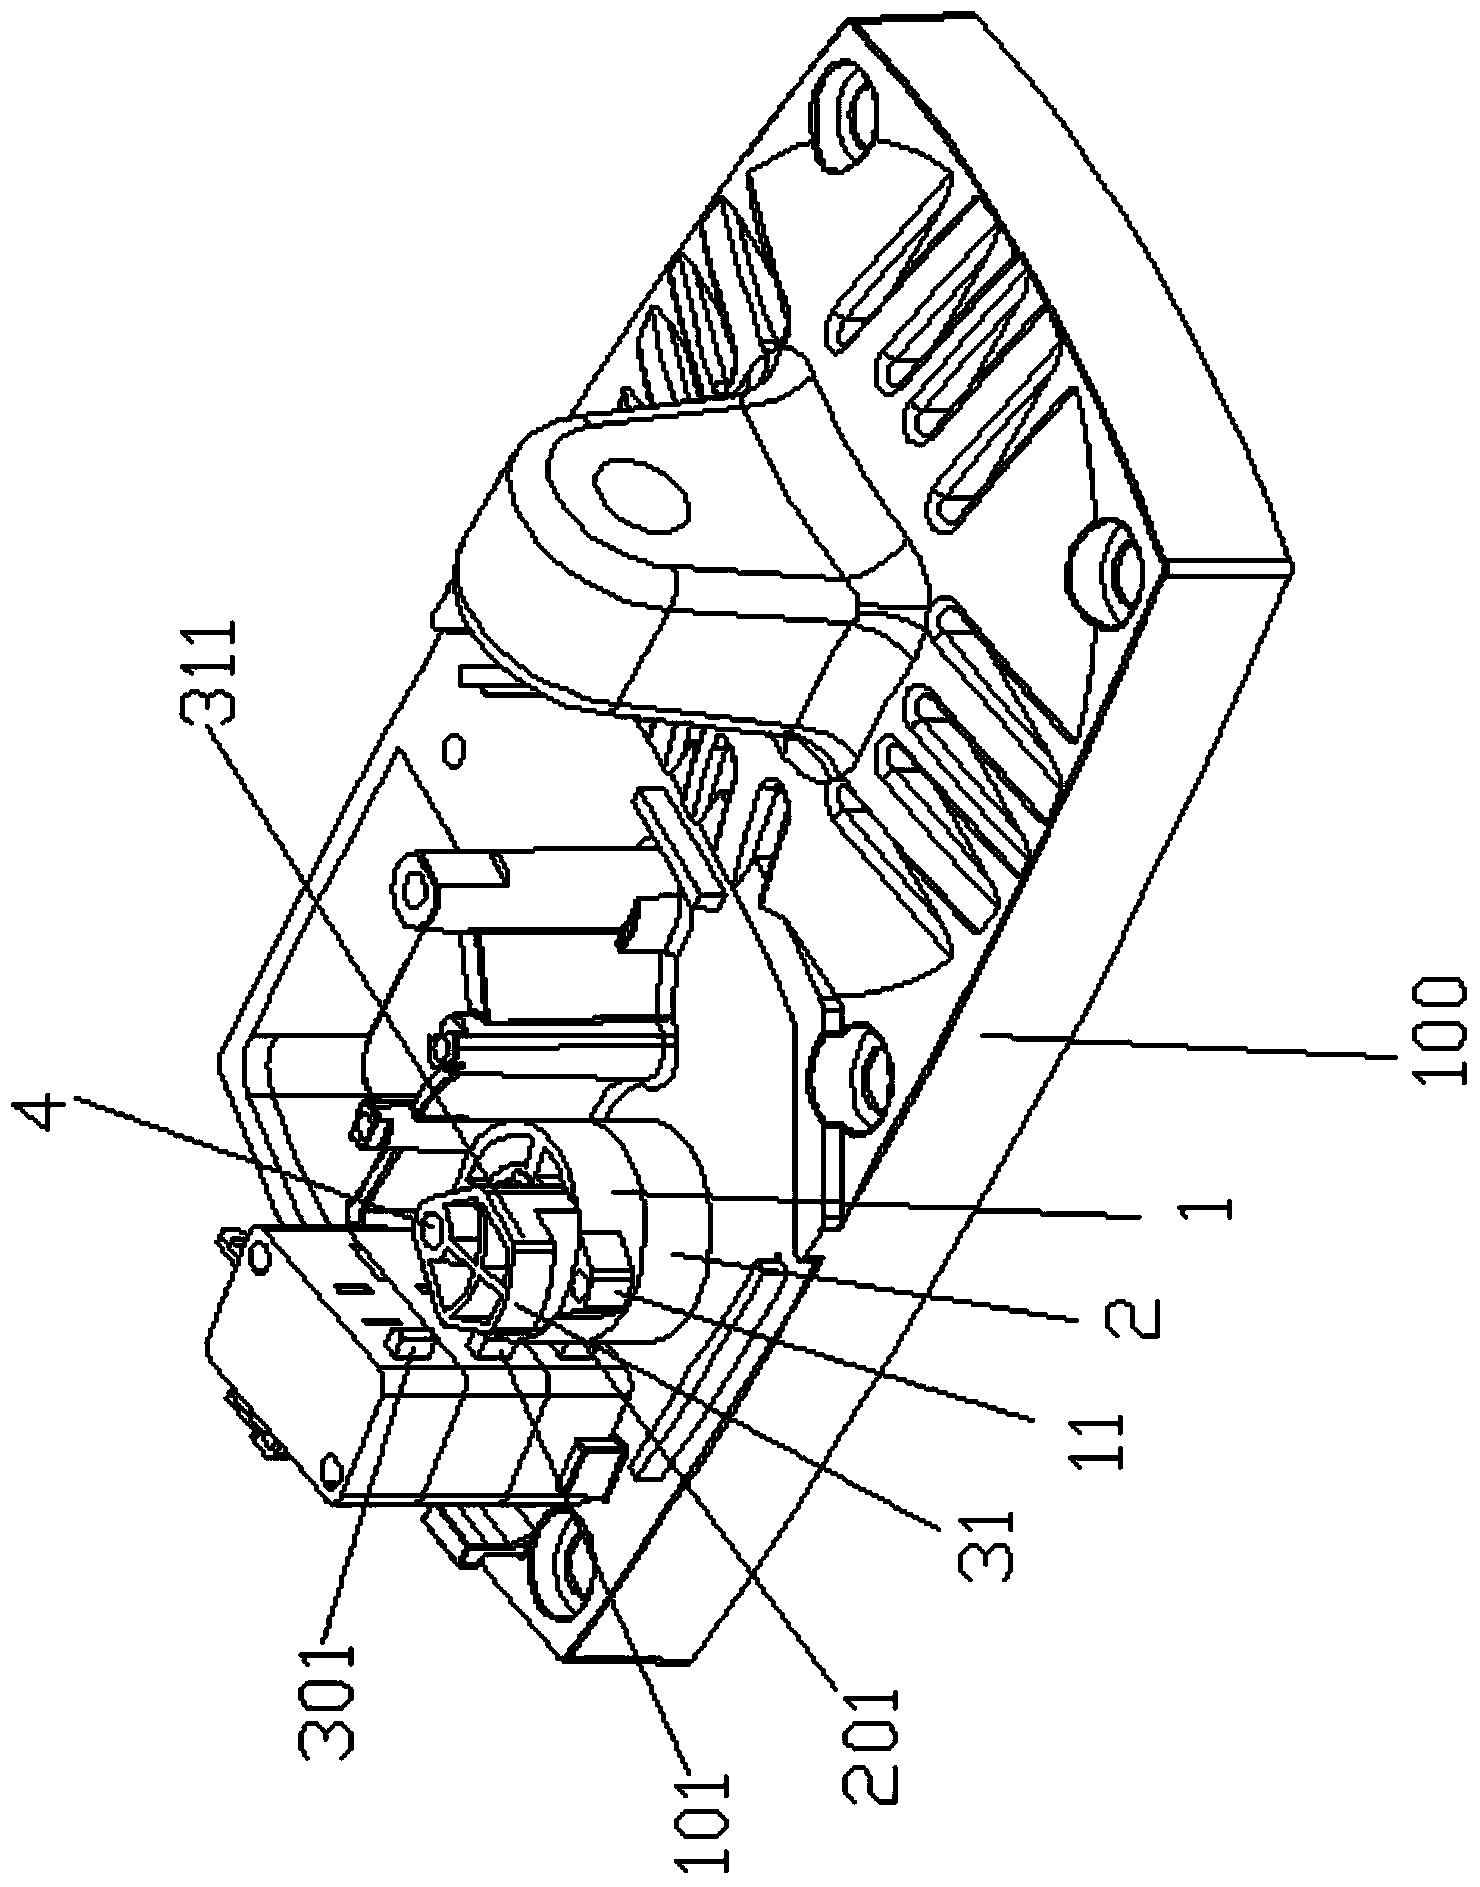 Brake with front outage device